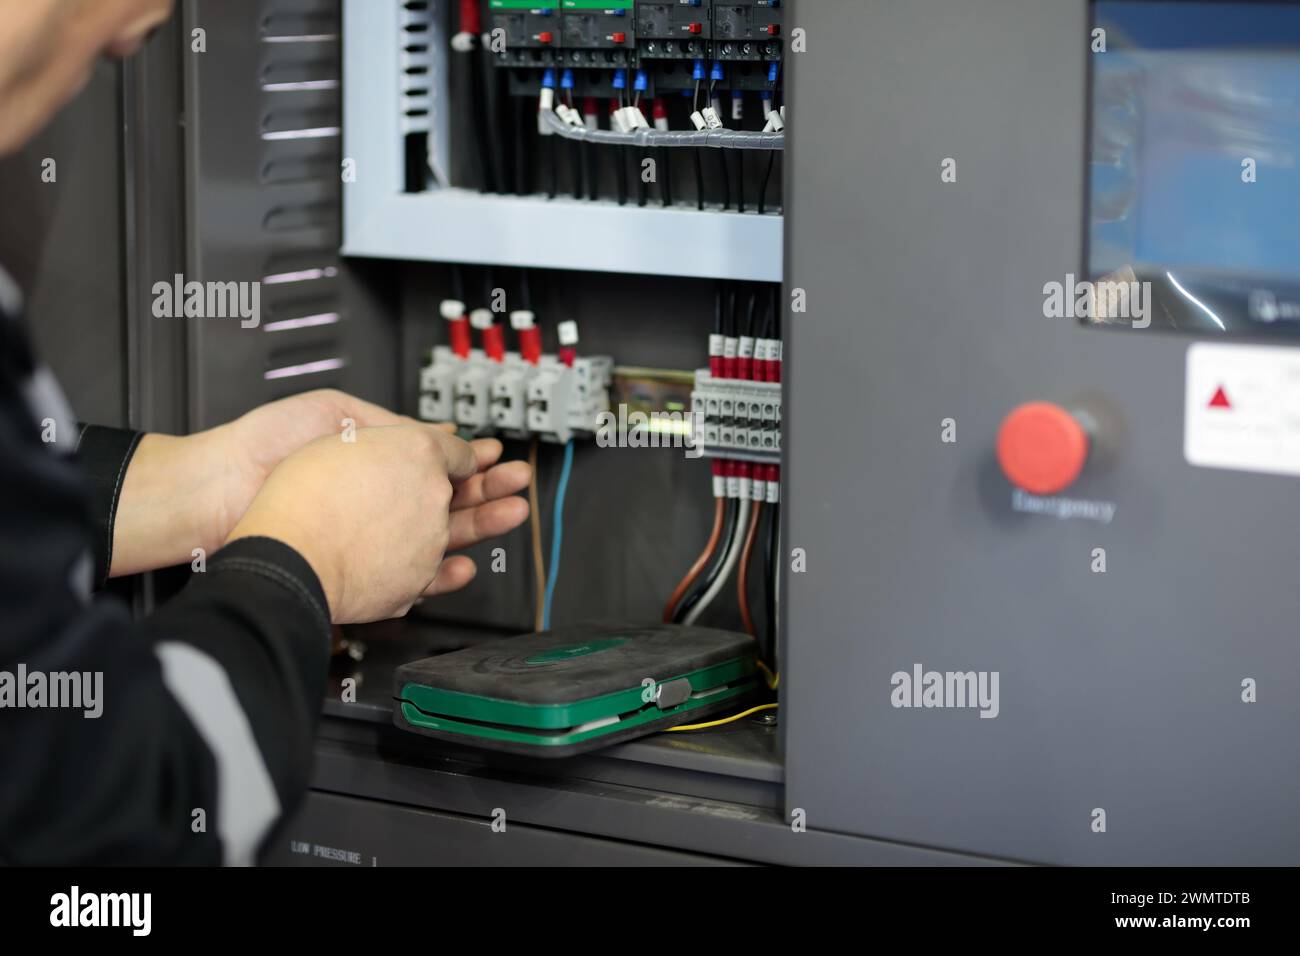 Electrician connecting wires in the control cabinet of industrial equipment. Industrial electrical panel. Selective focus. Stock Photo